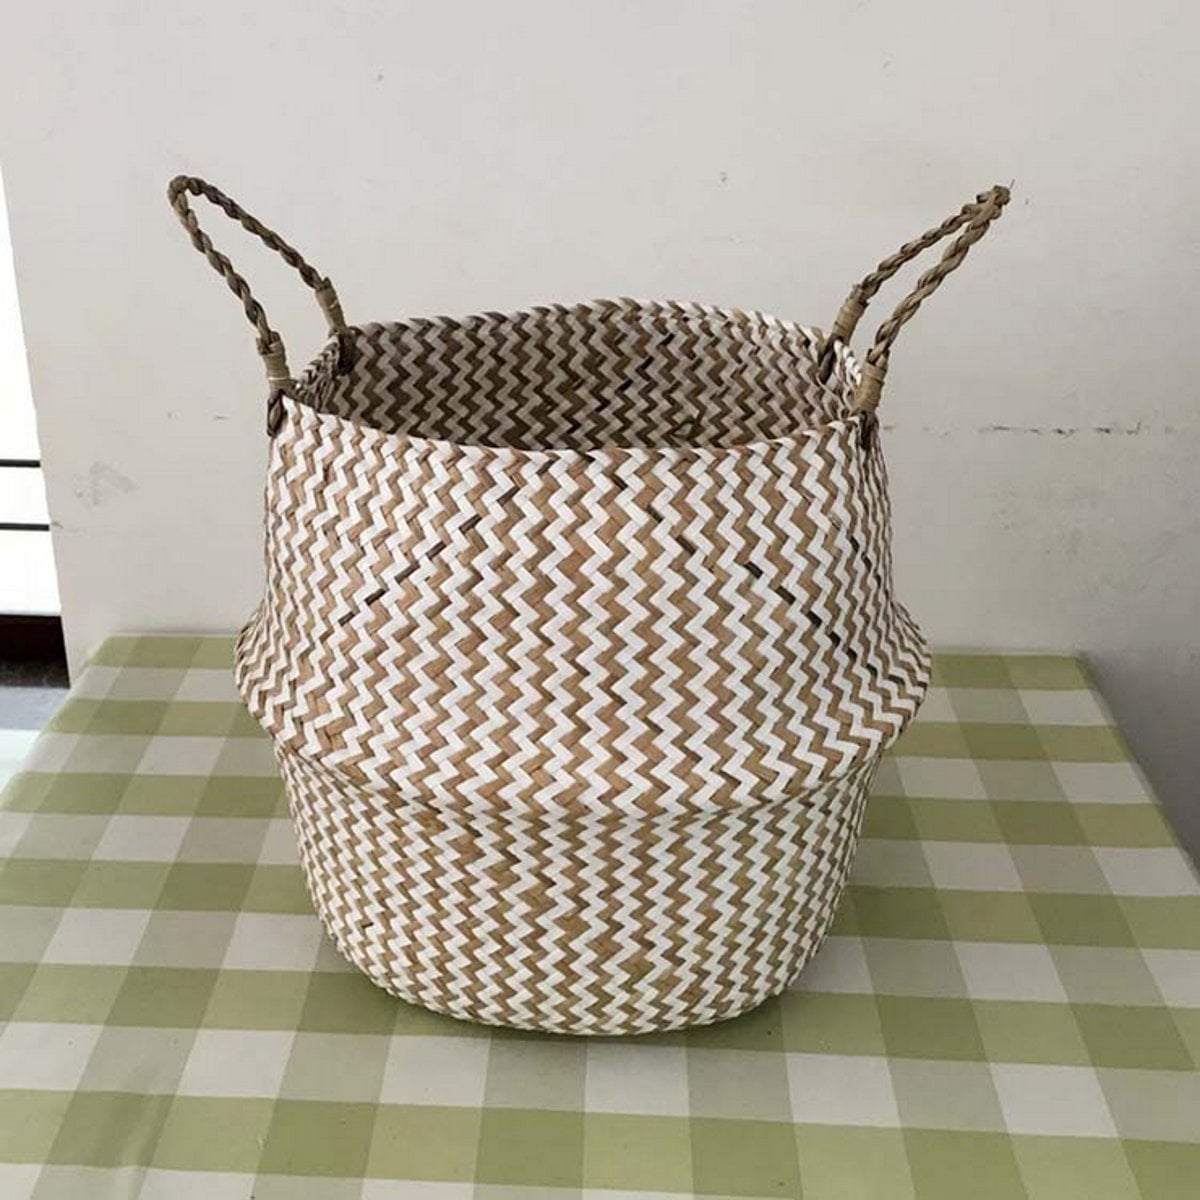 Details about   Foldable Seagrass Belly Basket Plant Pot Wicker Woven Laundry Bag Room Decor New 